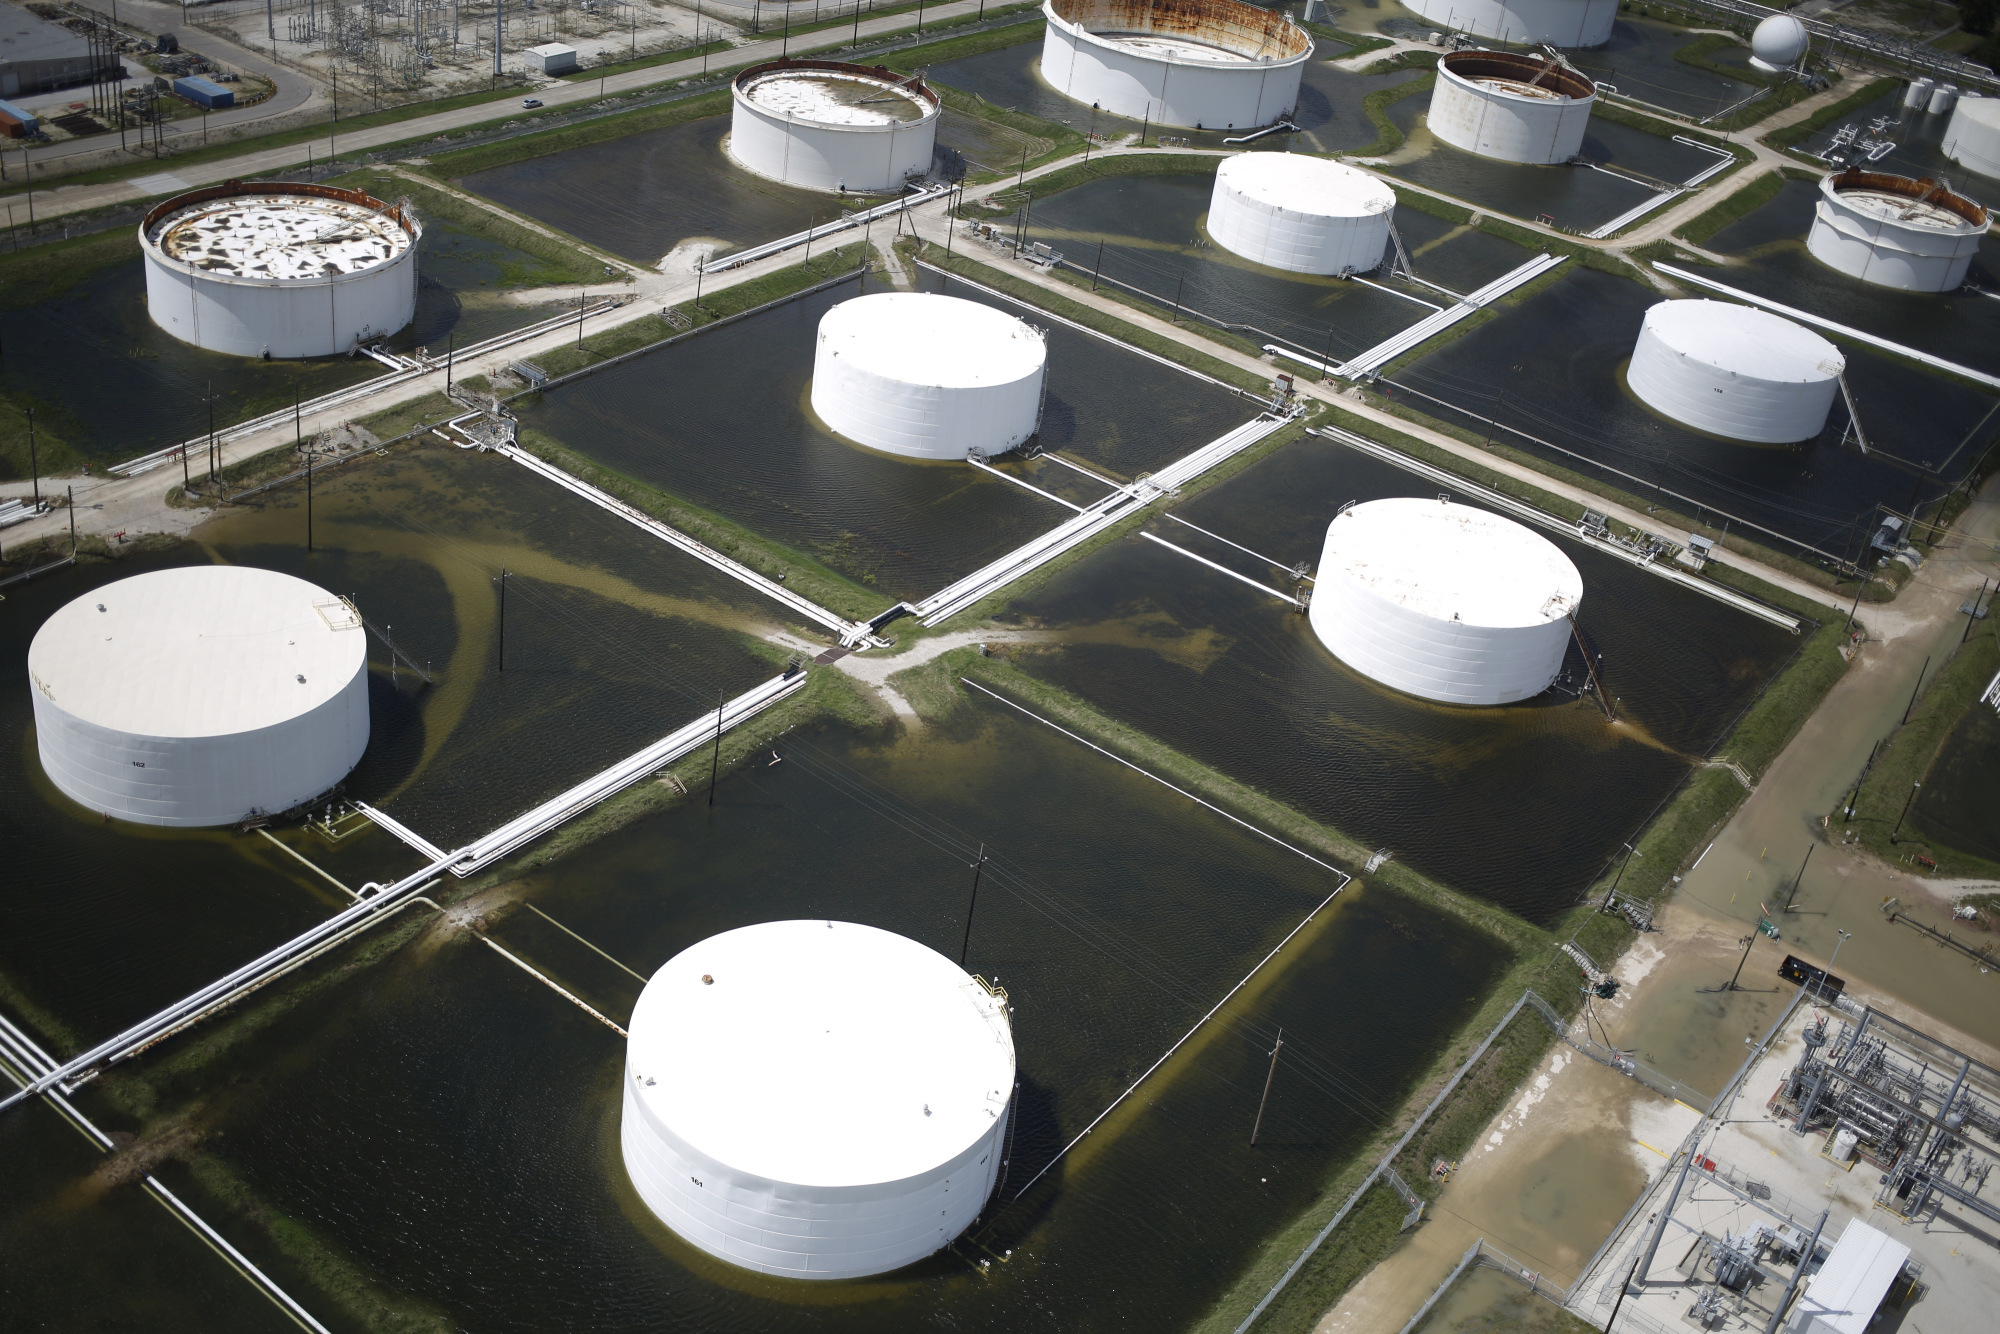 Rainwater from Hurricane Harvey surrounds oil refinery storage tanks in this aerial photograph taken above Texas City, Texas, U.S., on Wednesday, Aug. 30, 2017. Unprecedented flooding from the Category 4 storm that slammed into the state's coast last week, sending gasoline prices surging as oil refineries shut, may also set a record for rainfall in the contiguous U.S., the weather service said Tuesday. Photographer: Luke Sharrett/Bloomberg